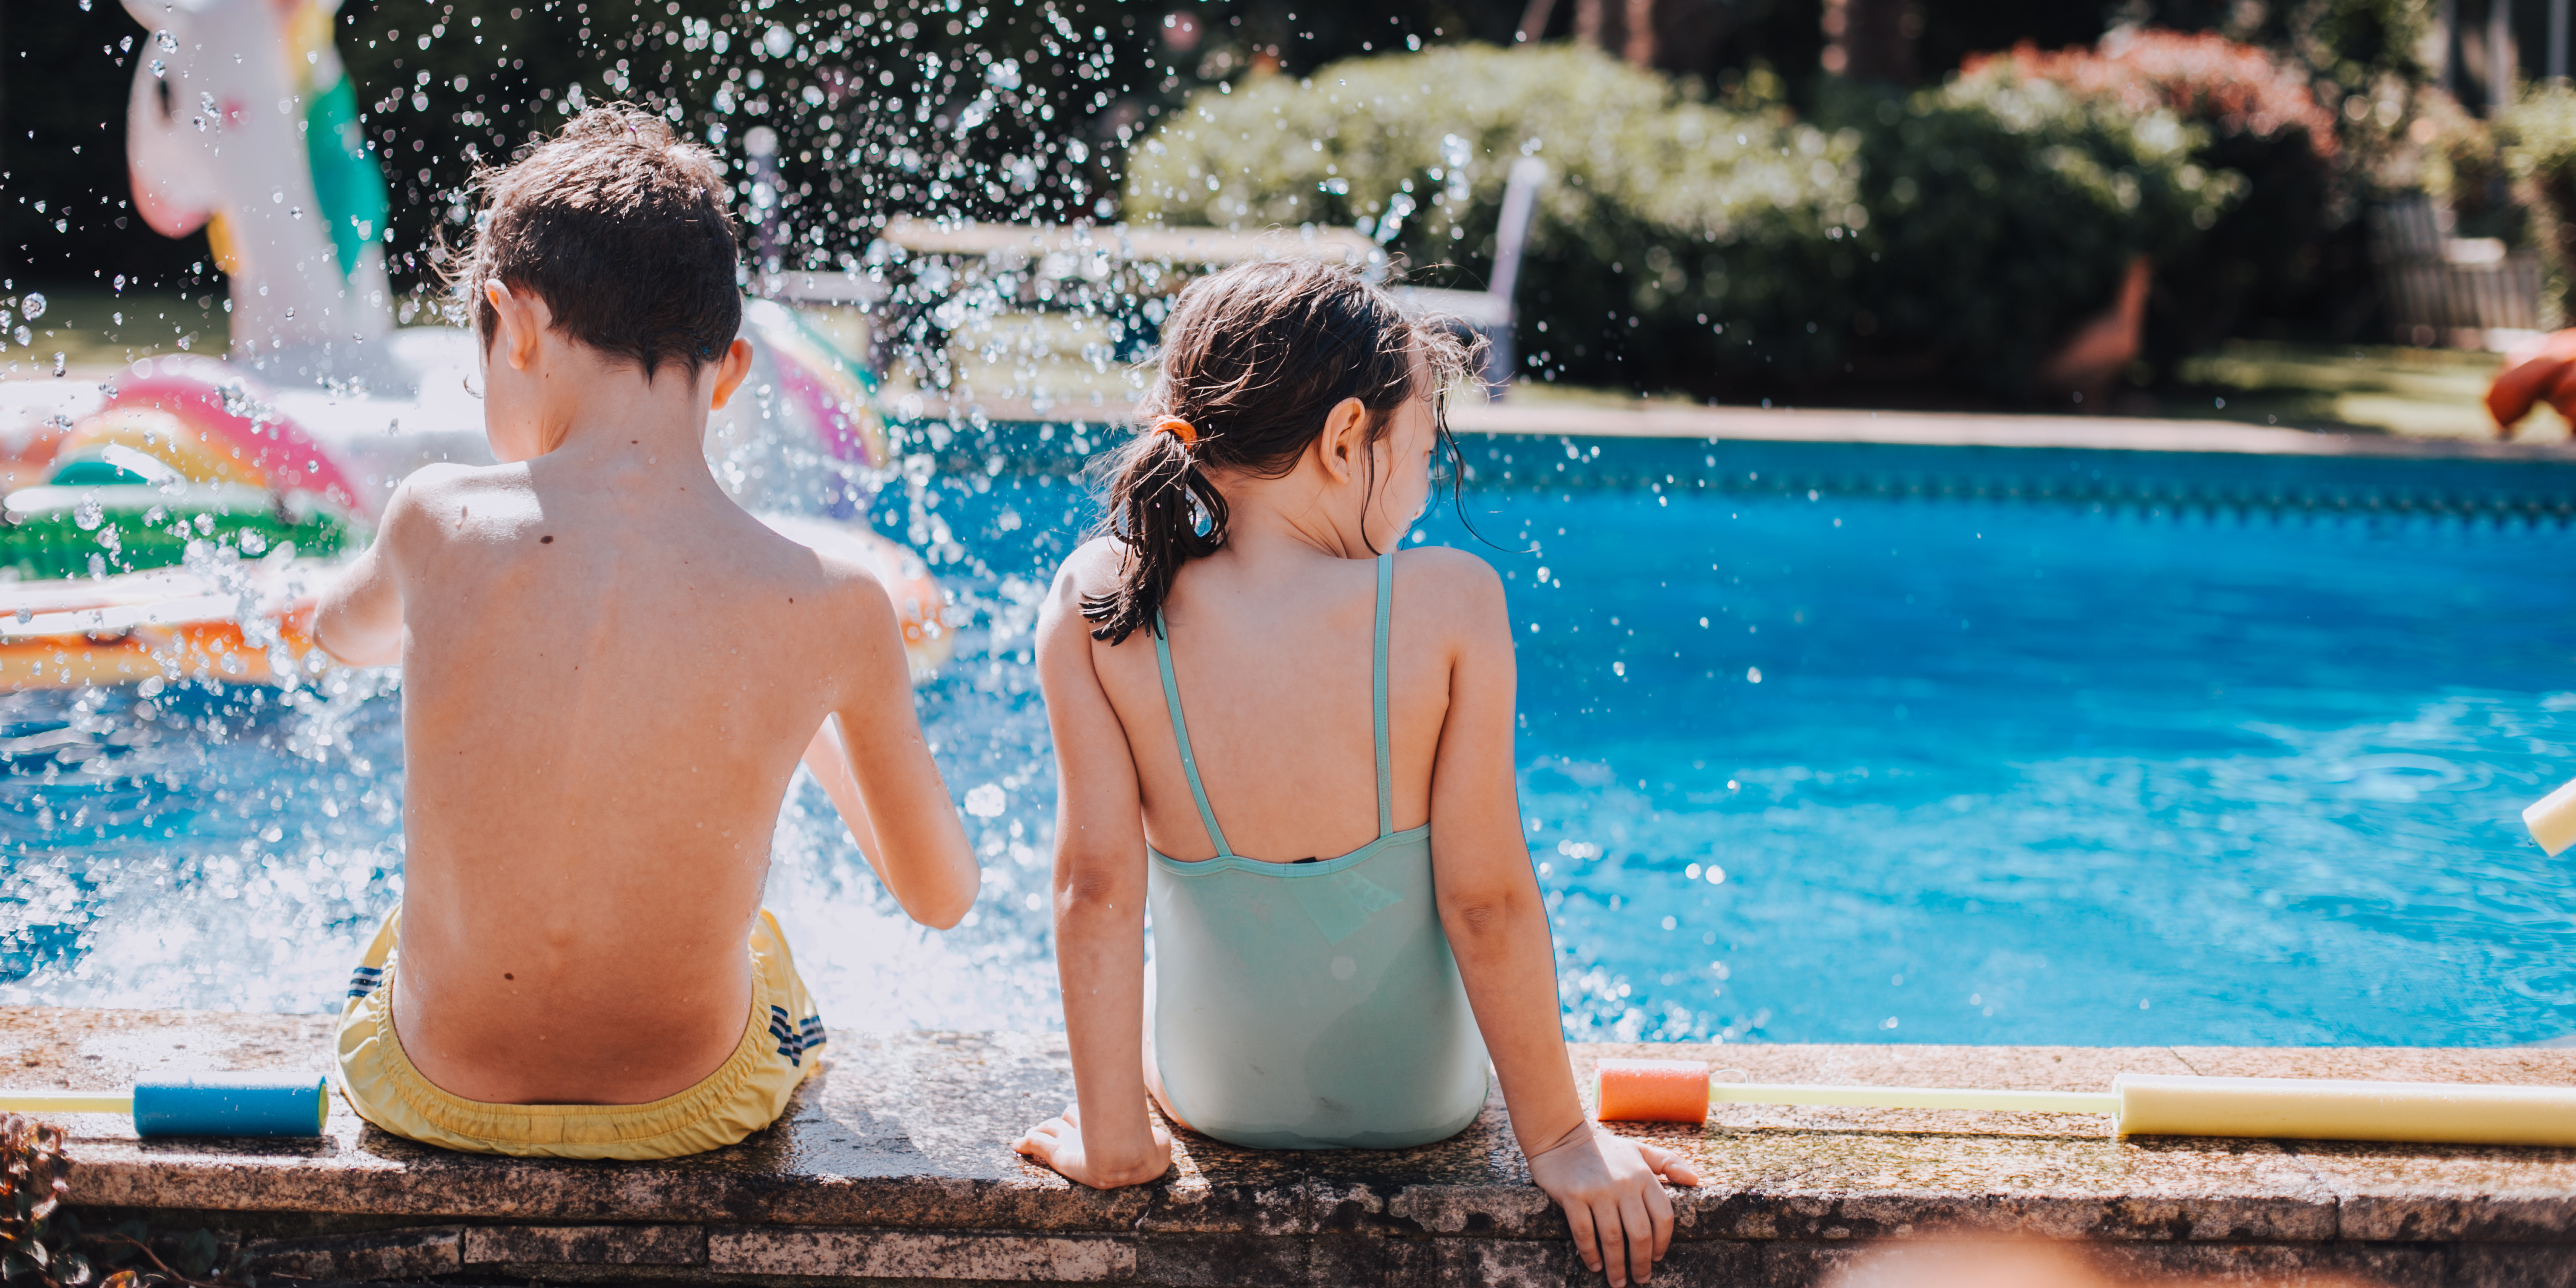 Top 10 summer safety tips to help kids have fun and stay injury free 